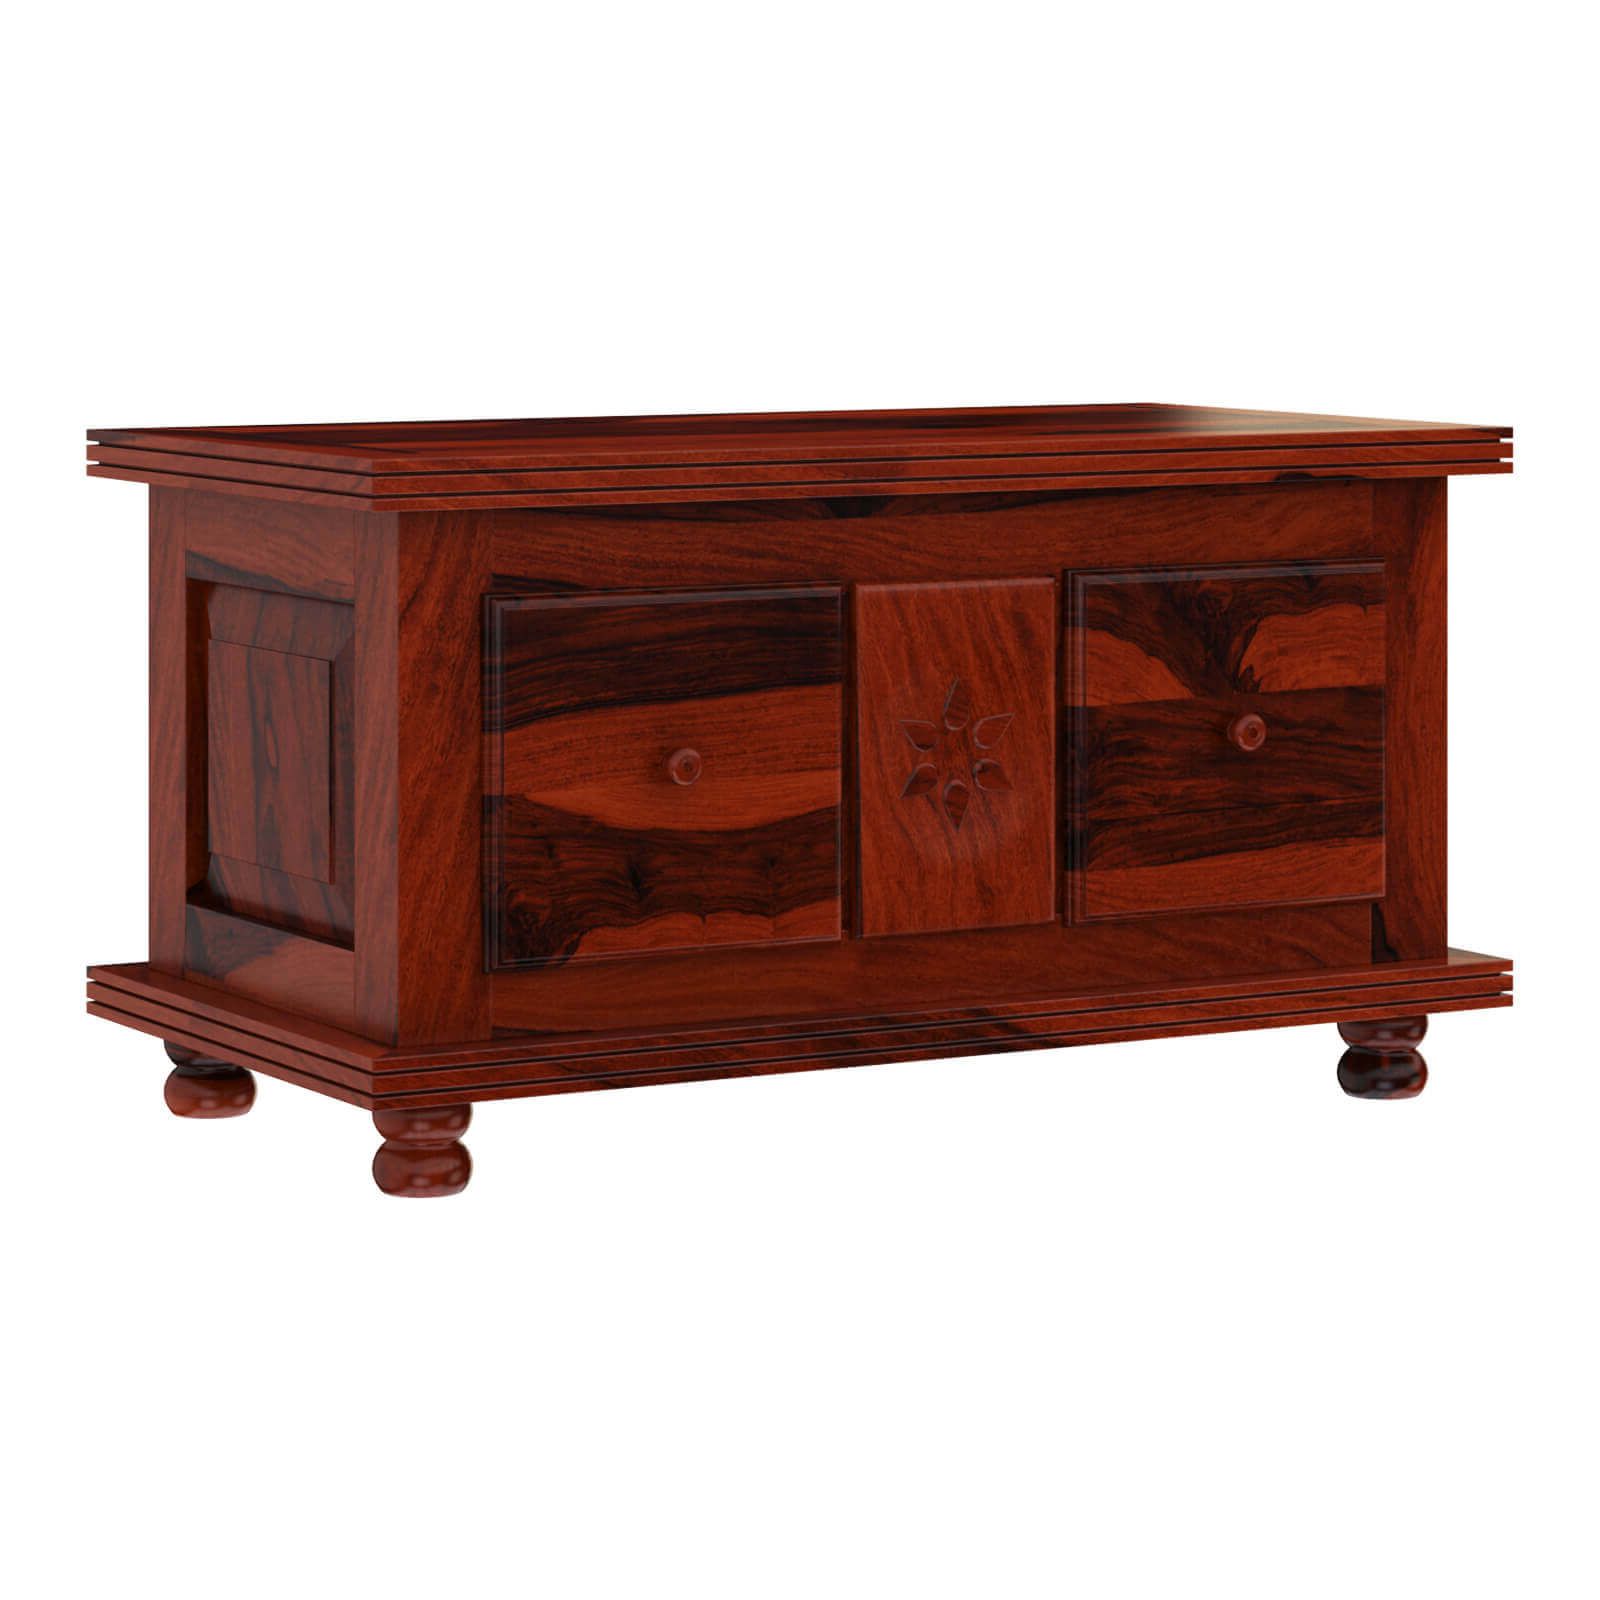 Arca Rustic Solid Wood 2 Drawer Storage Cocktail Coffee Table Throughout Favorite 2 Drawer Cocktail Tables (Gallery 2 of 20)